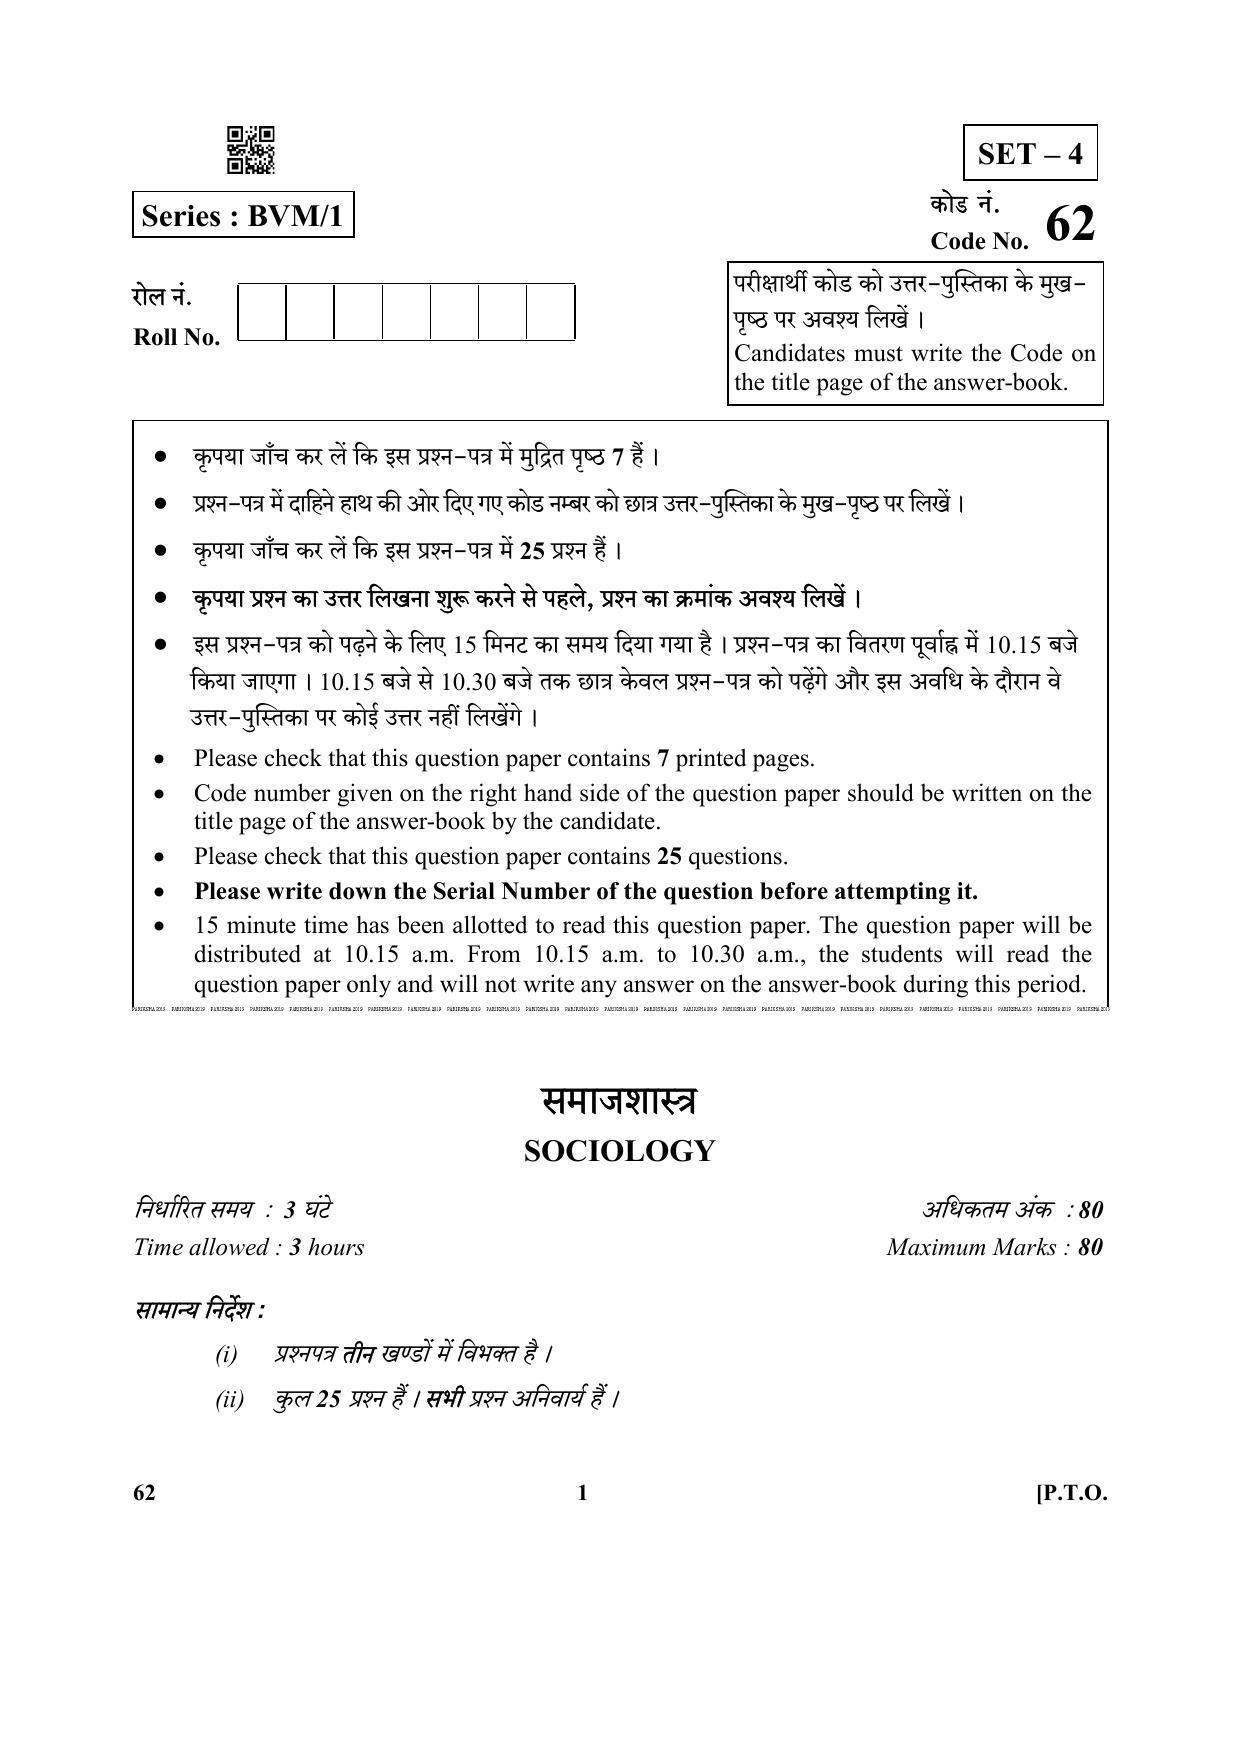 CBSE Class 12 62 (Sociology) 2019 Question Paper - Page 1